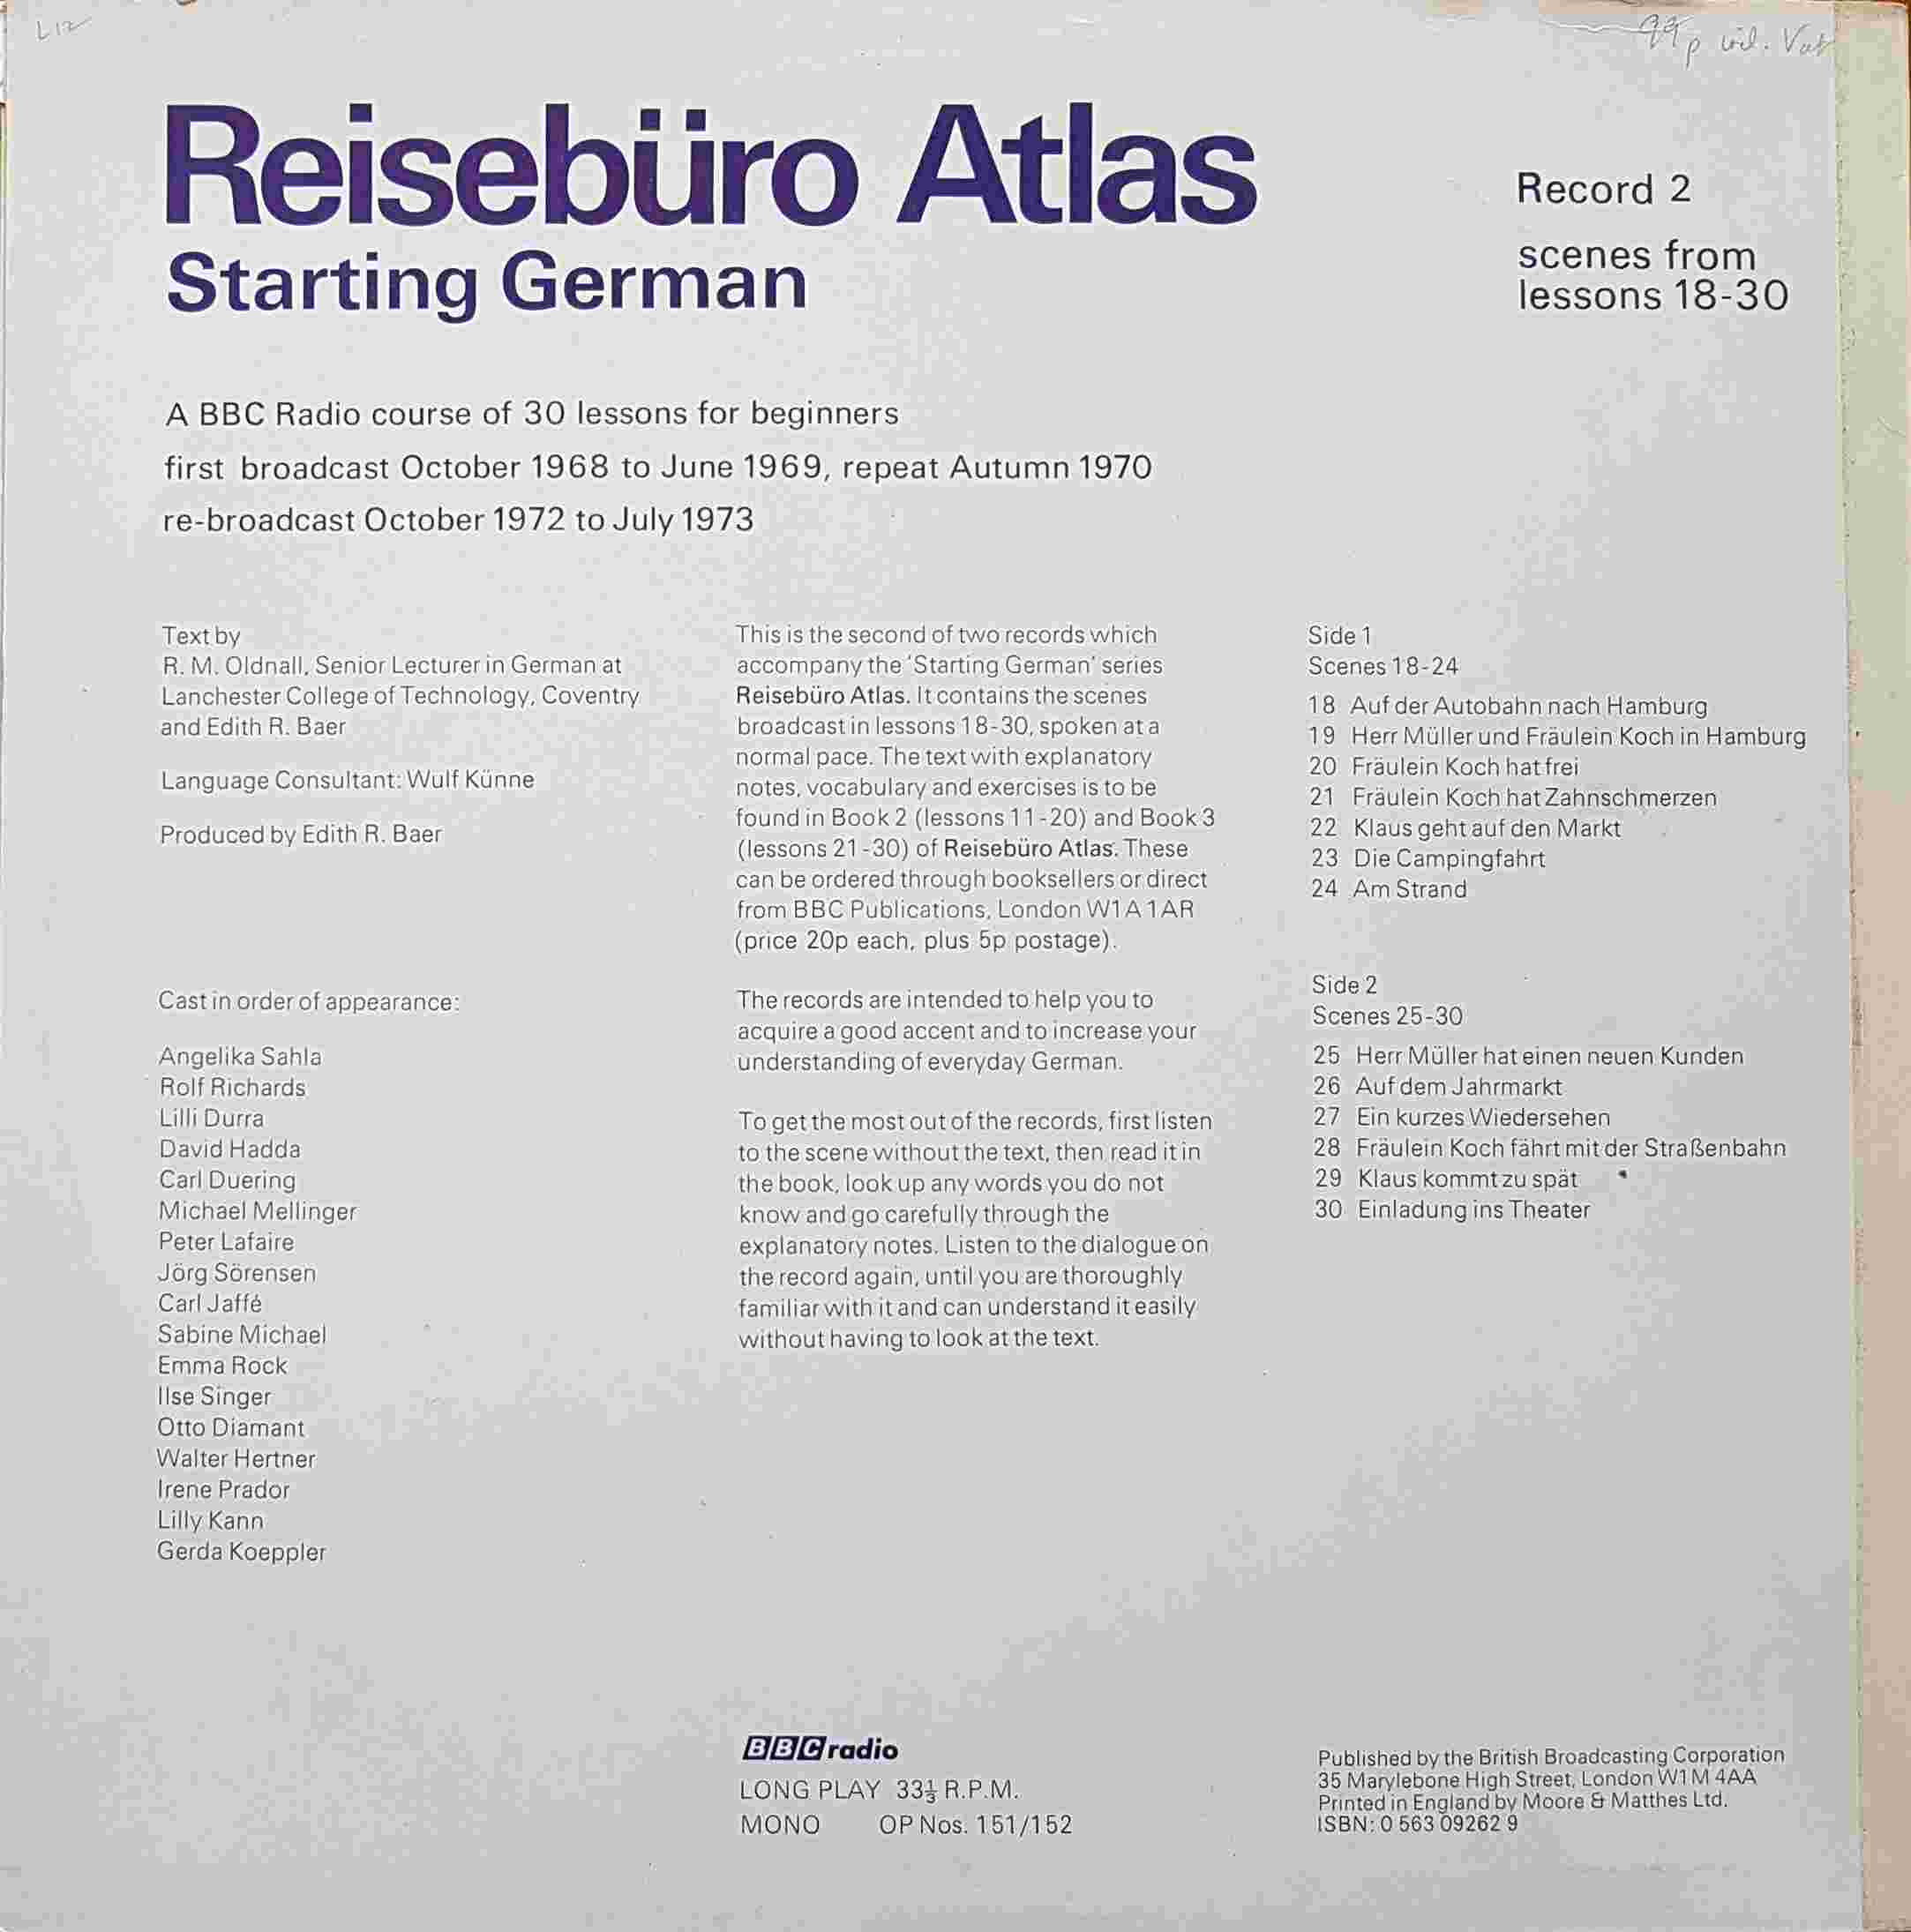 Picture of OP 151/152 Reiseburo Atlas - Starting German - A BBC Radio course of 30 lessons for beginners - Record 2 - Lessons 18 - 30 by artist R. M. Oldnall / Wulf Kunne from the BBC records and Tapes library